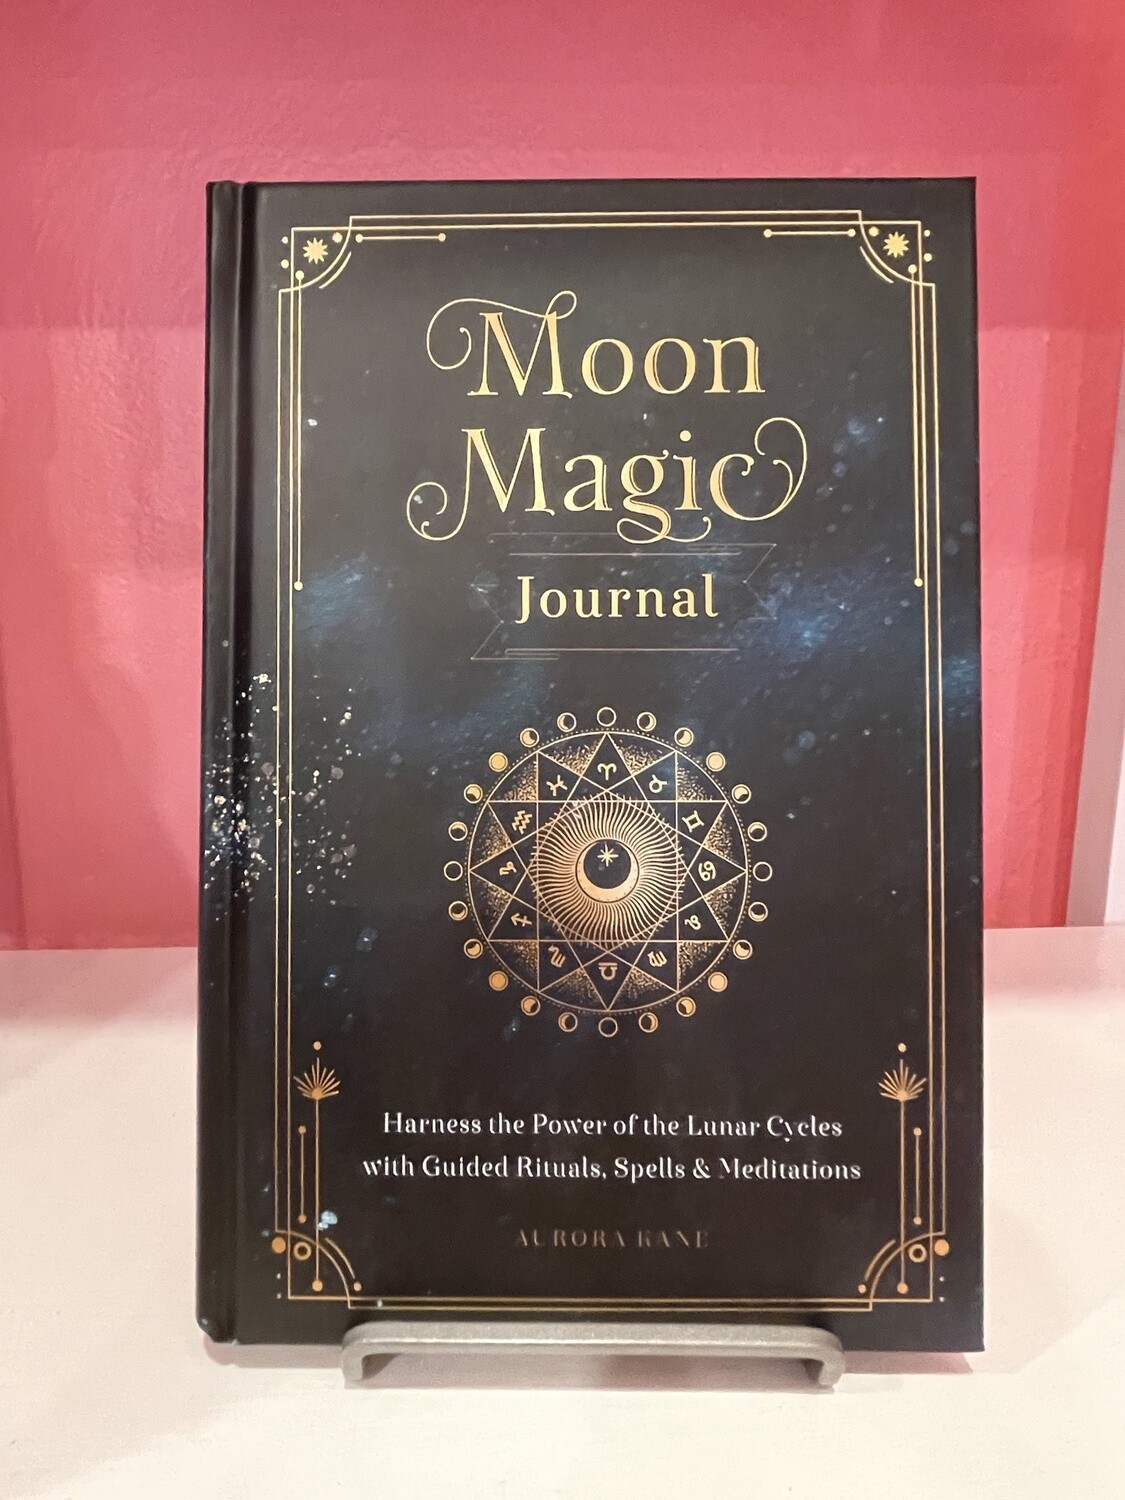 Moon Magic Journal: Harness the Power of the Lunar Cycles with Guided Rituals, Spells, and Meditations